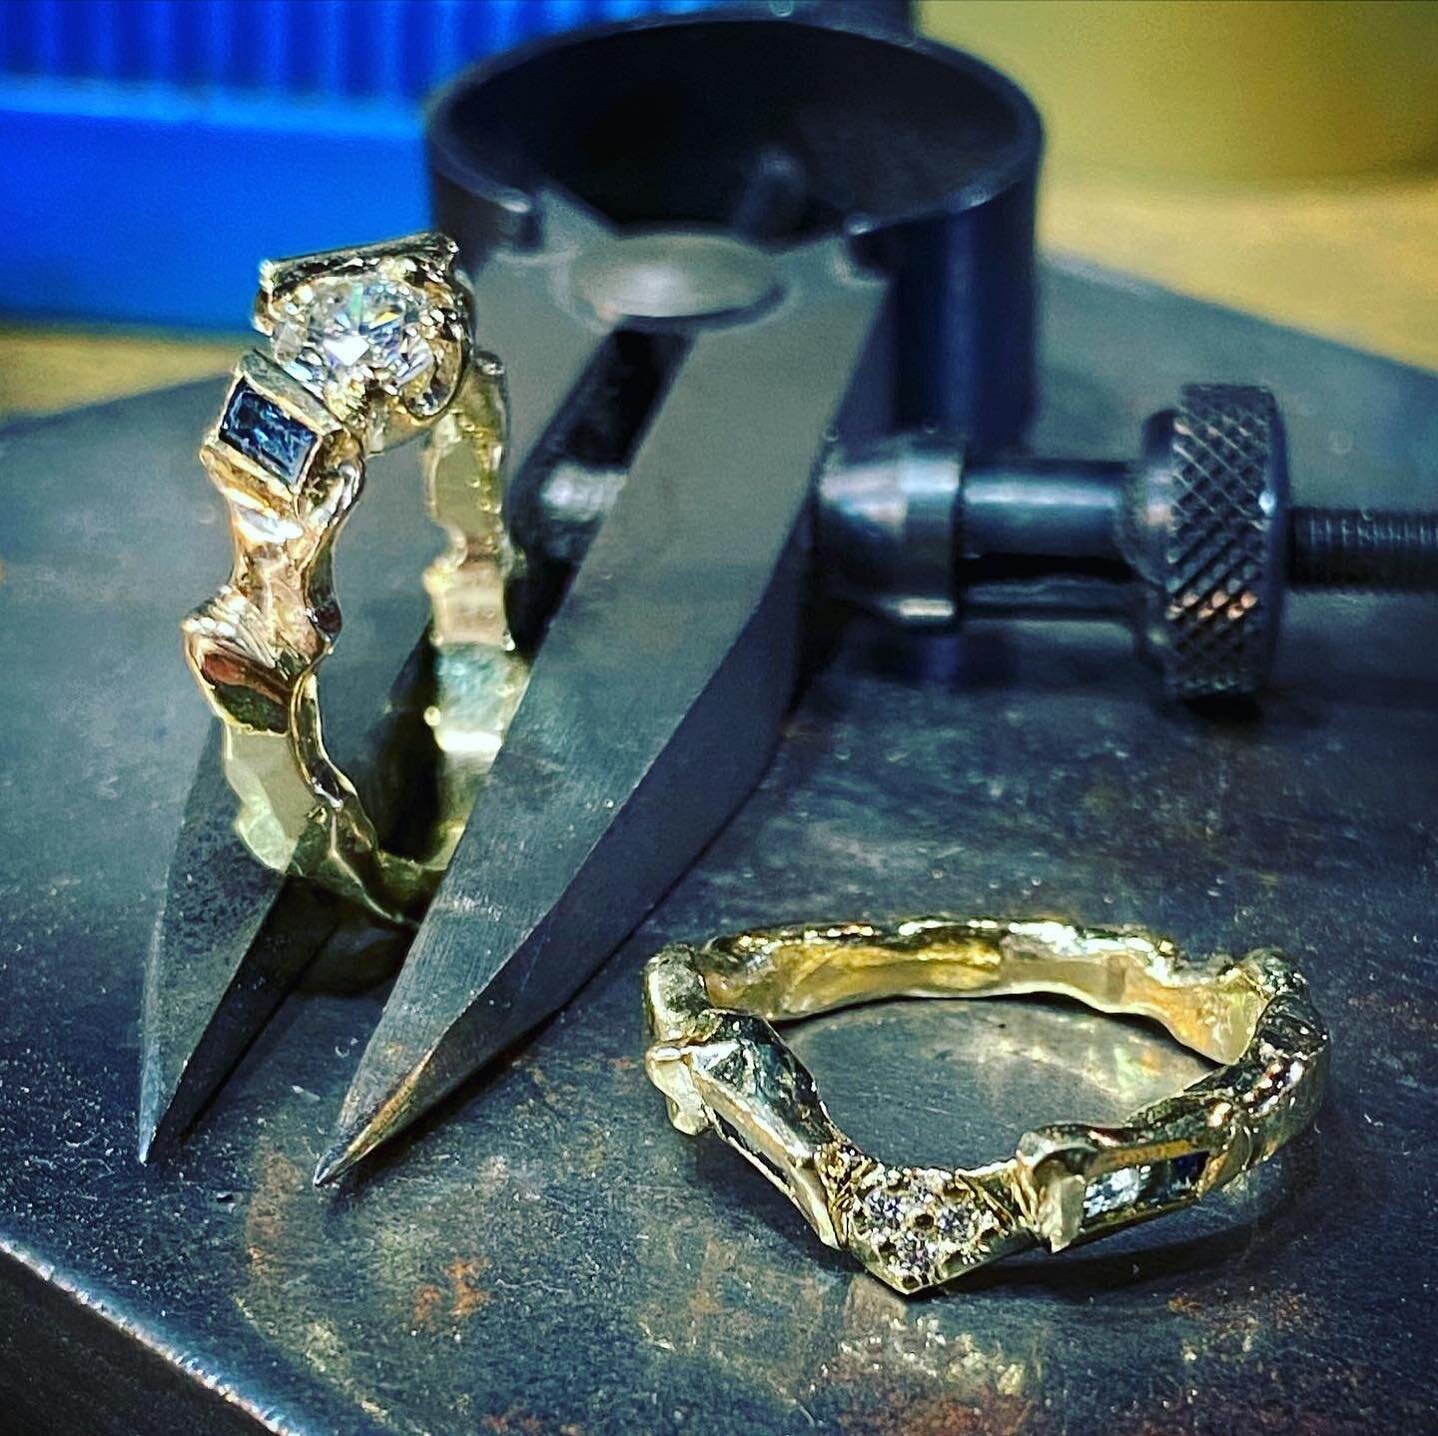 Fluidity &amp; flexibility are key elements in the adventures of life. 

Gold at its rawest, defined and sculpted to secure what&rsquo;s important. 

Life: natural &amp; flowing; forged when needed into the memories that bind.

This jeweler from the 